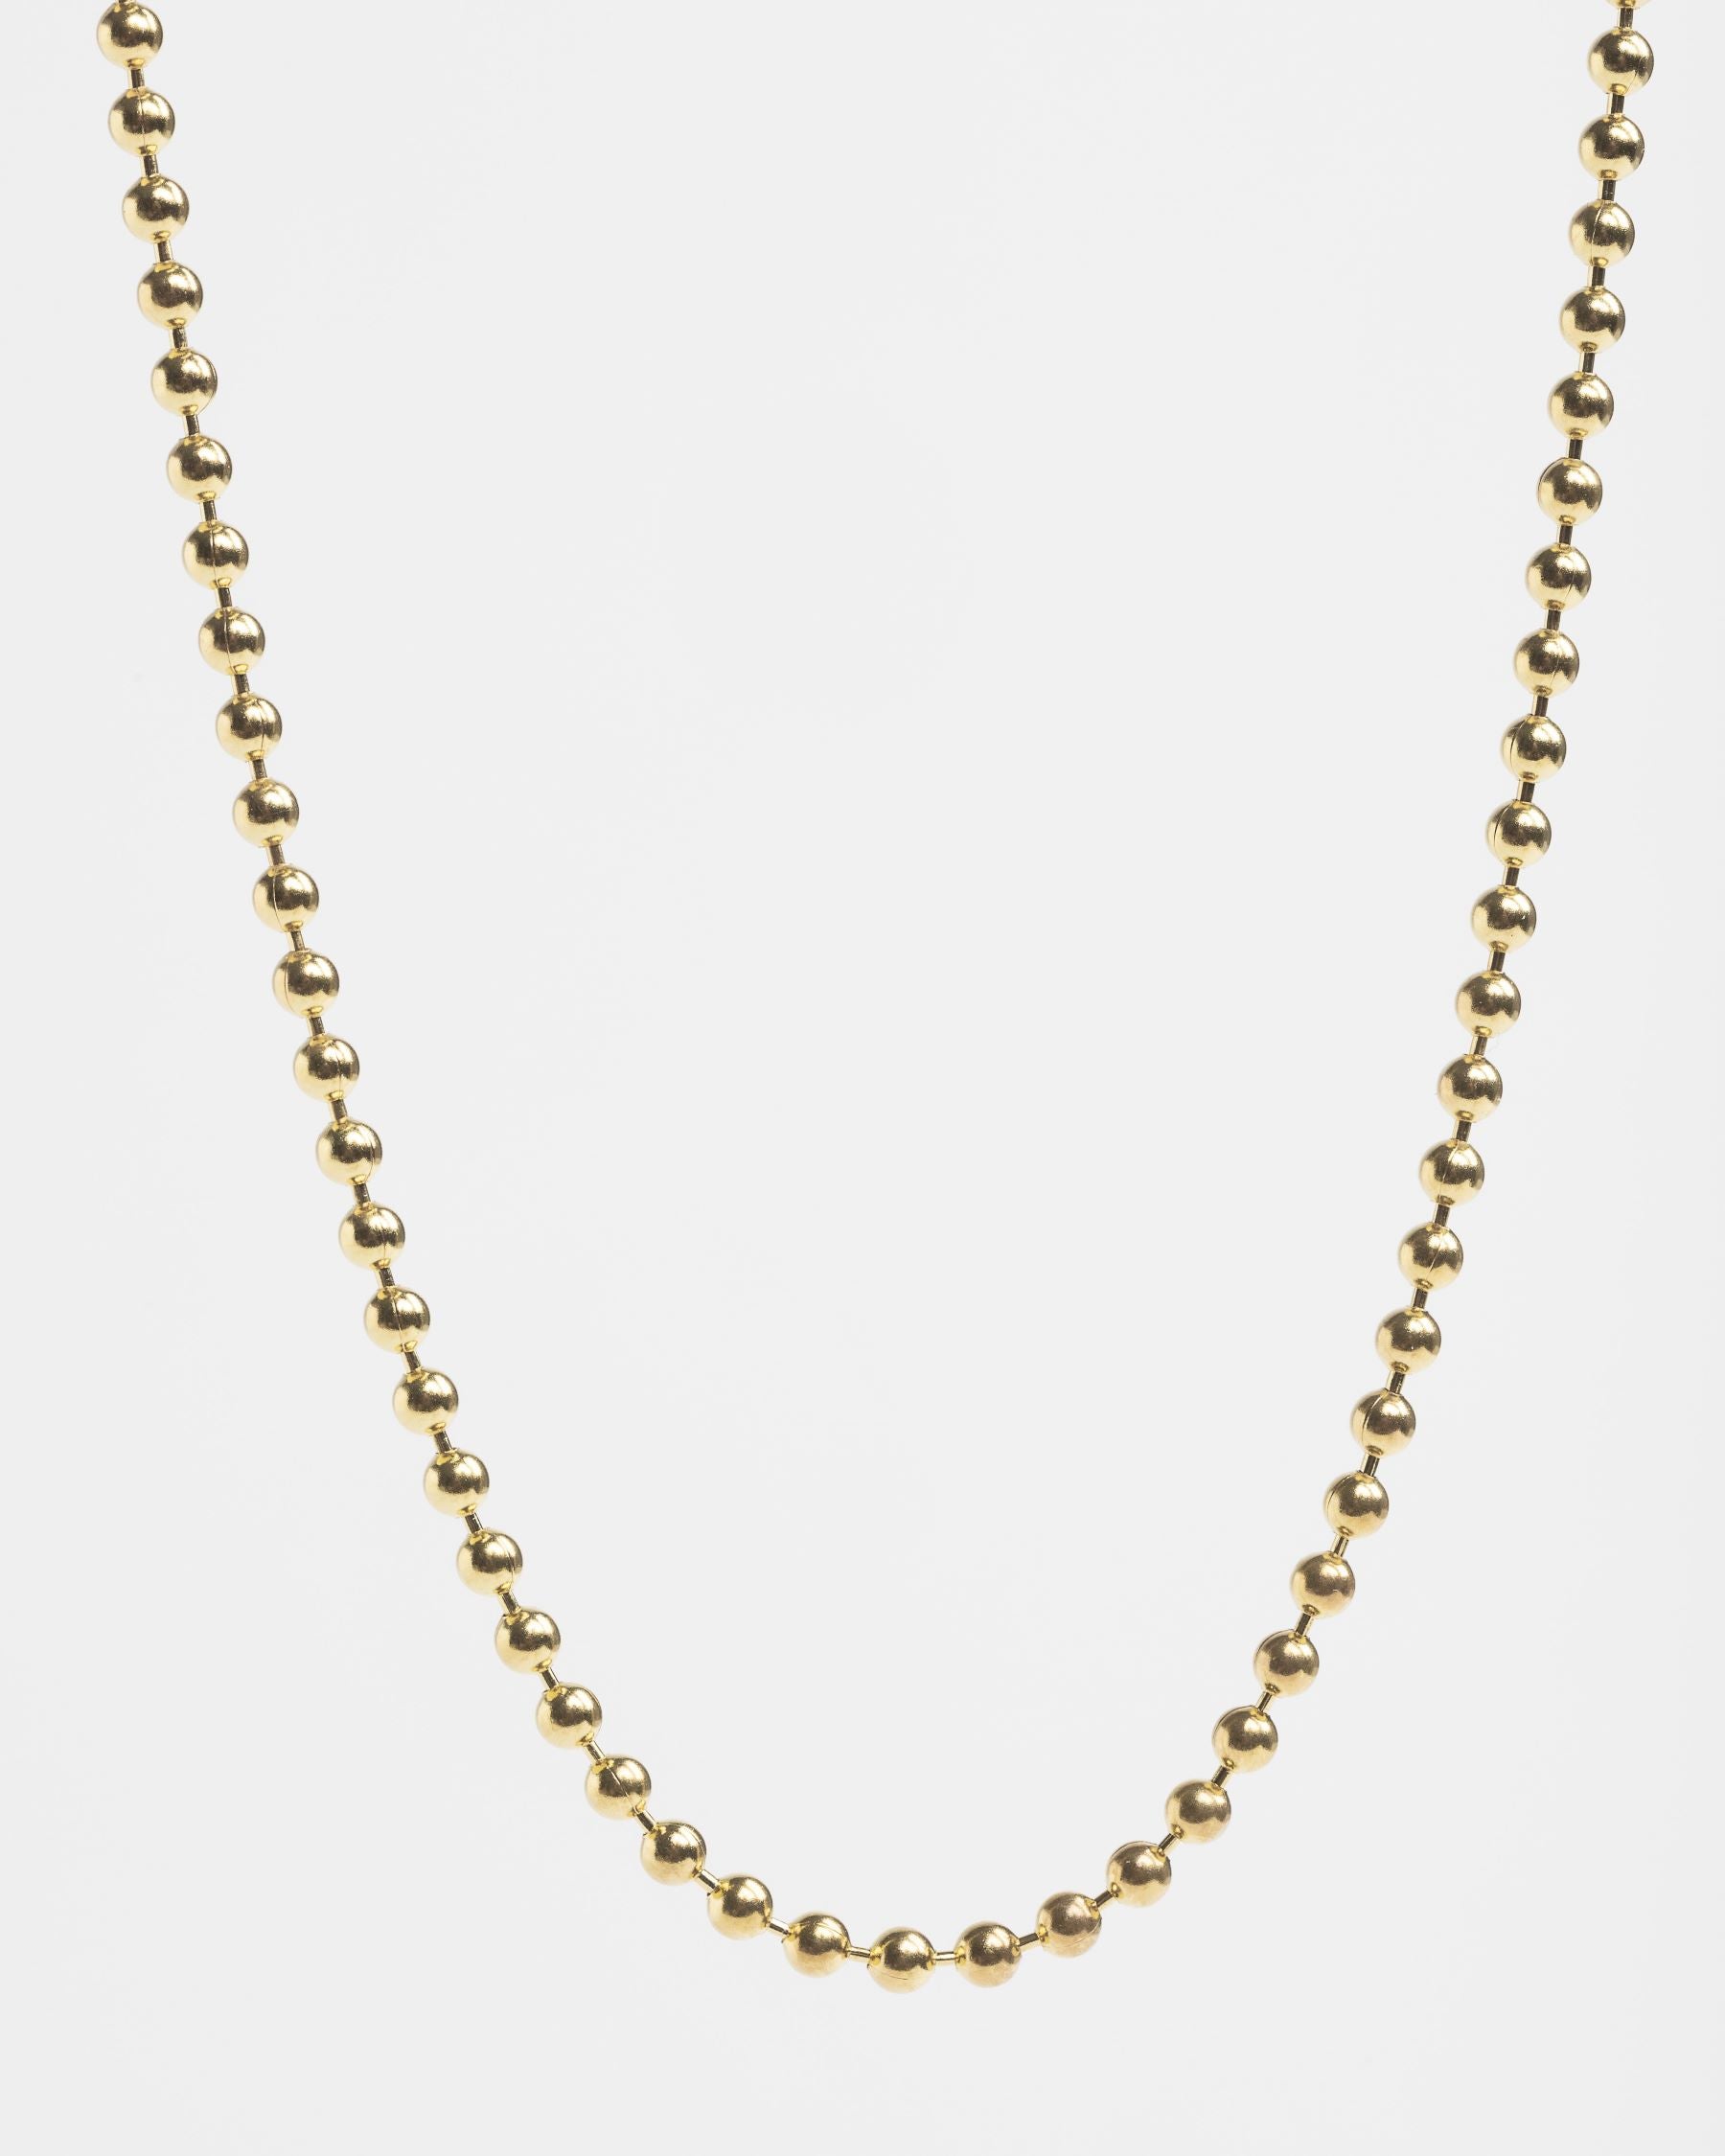 Flash Large Gold Chain